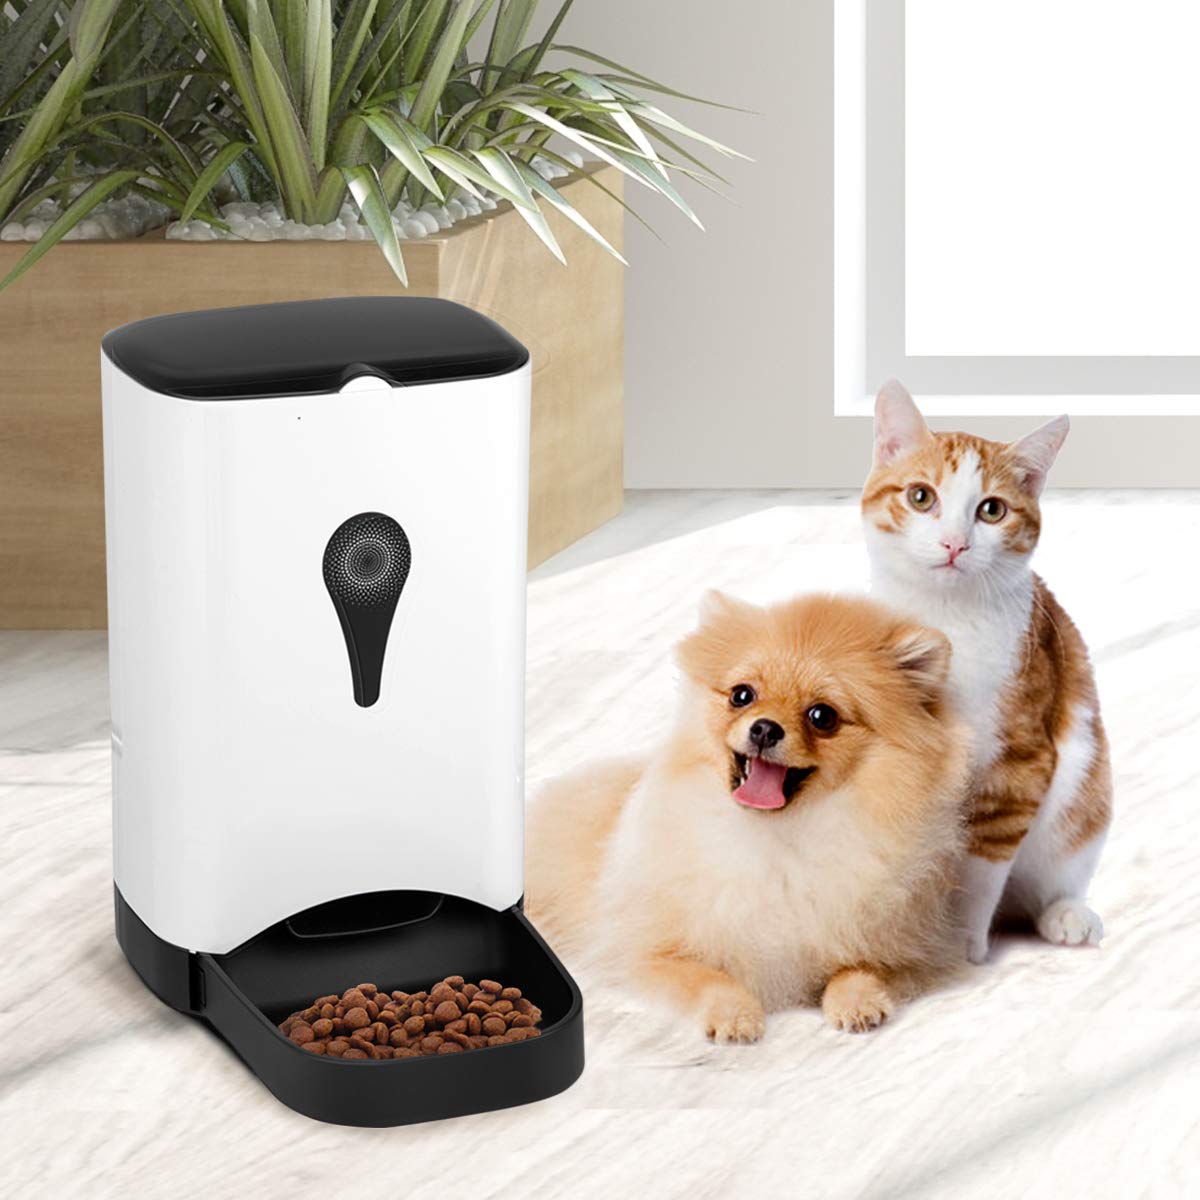 Giantex Automatic Cat Feeder 4.5L Pet Food Dispenser for Cats, Dogs & Small Animals